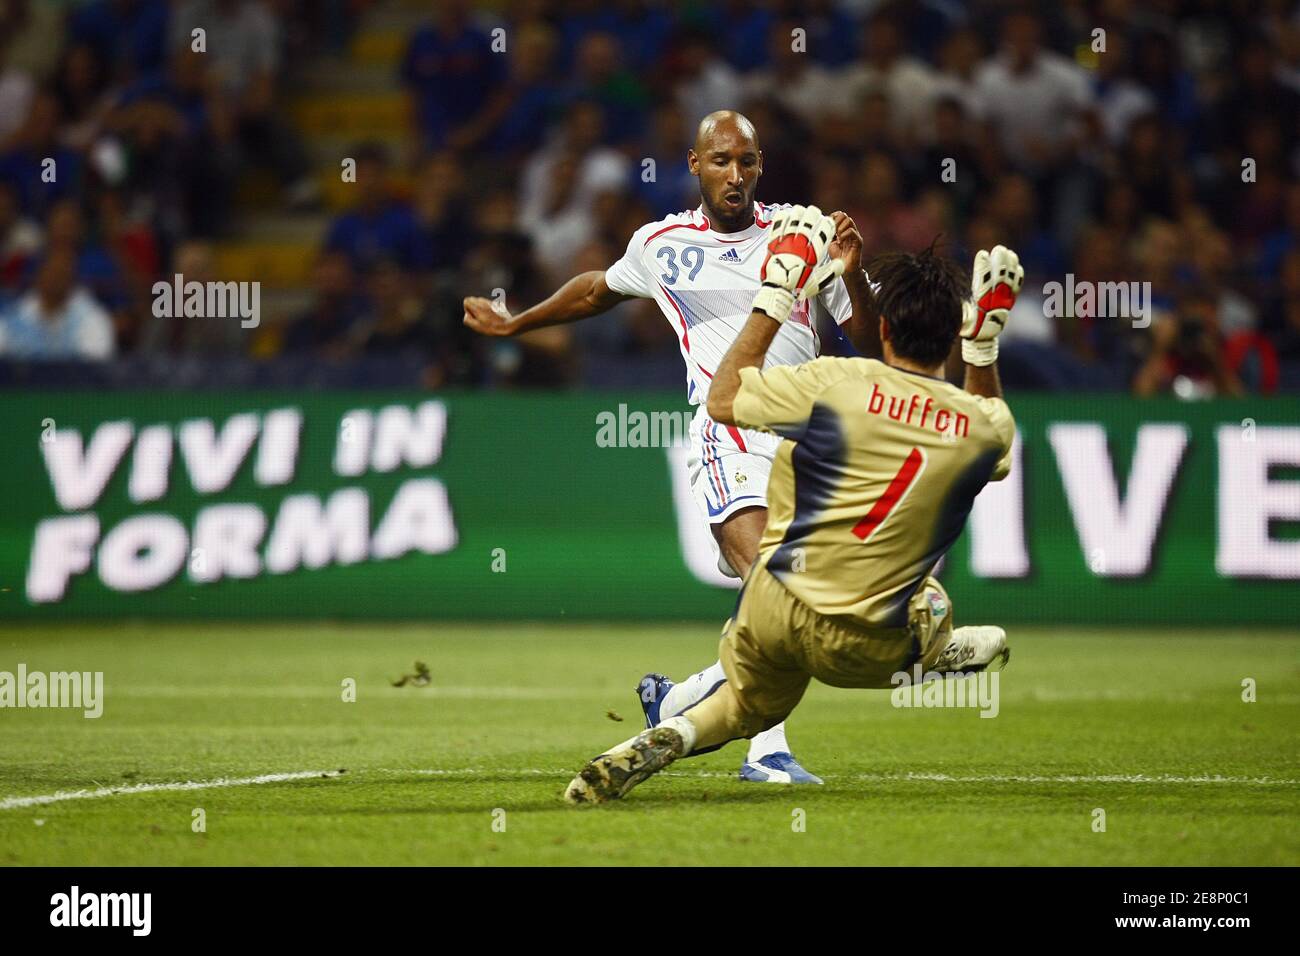 Italy's Gianluigi Buffon and France's Nicolas Anelka battle for the ball during the 2008 UEFA European Football Championship qualifying match Italy vs France in Milan, Italy, on September 9, 2007. The game ended in a draw 0-0. Photo by Christian Liewig/ABACAPRESS.COM Stock Photo